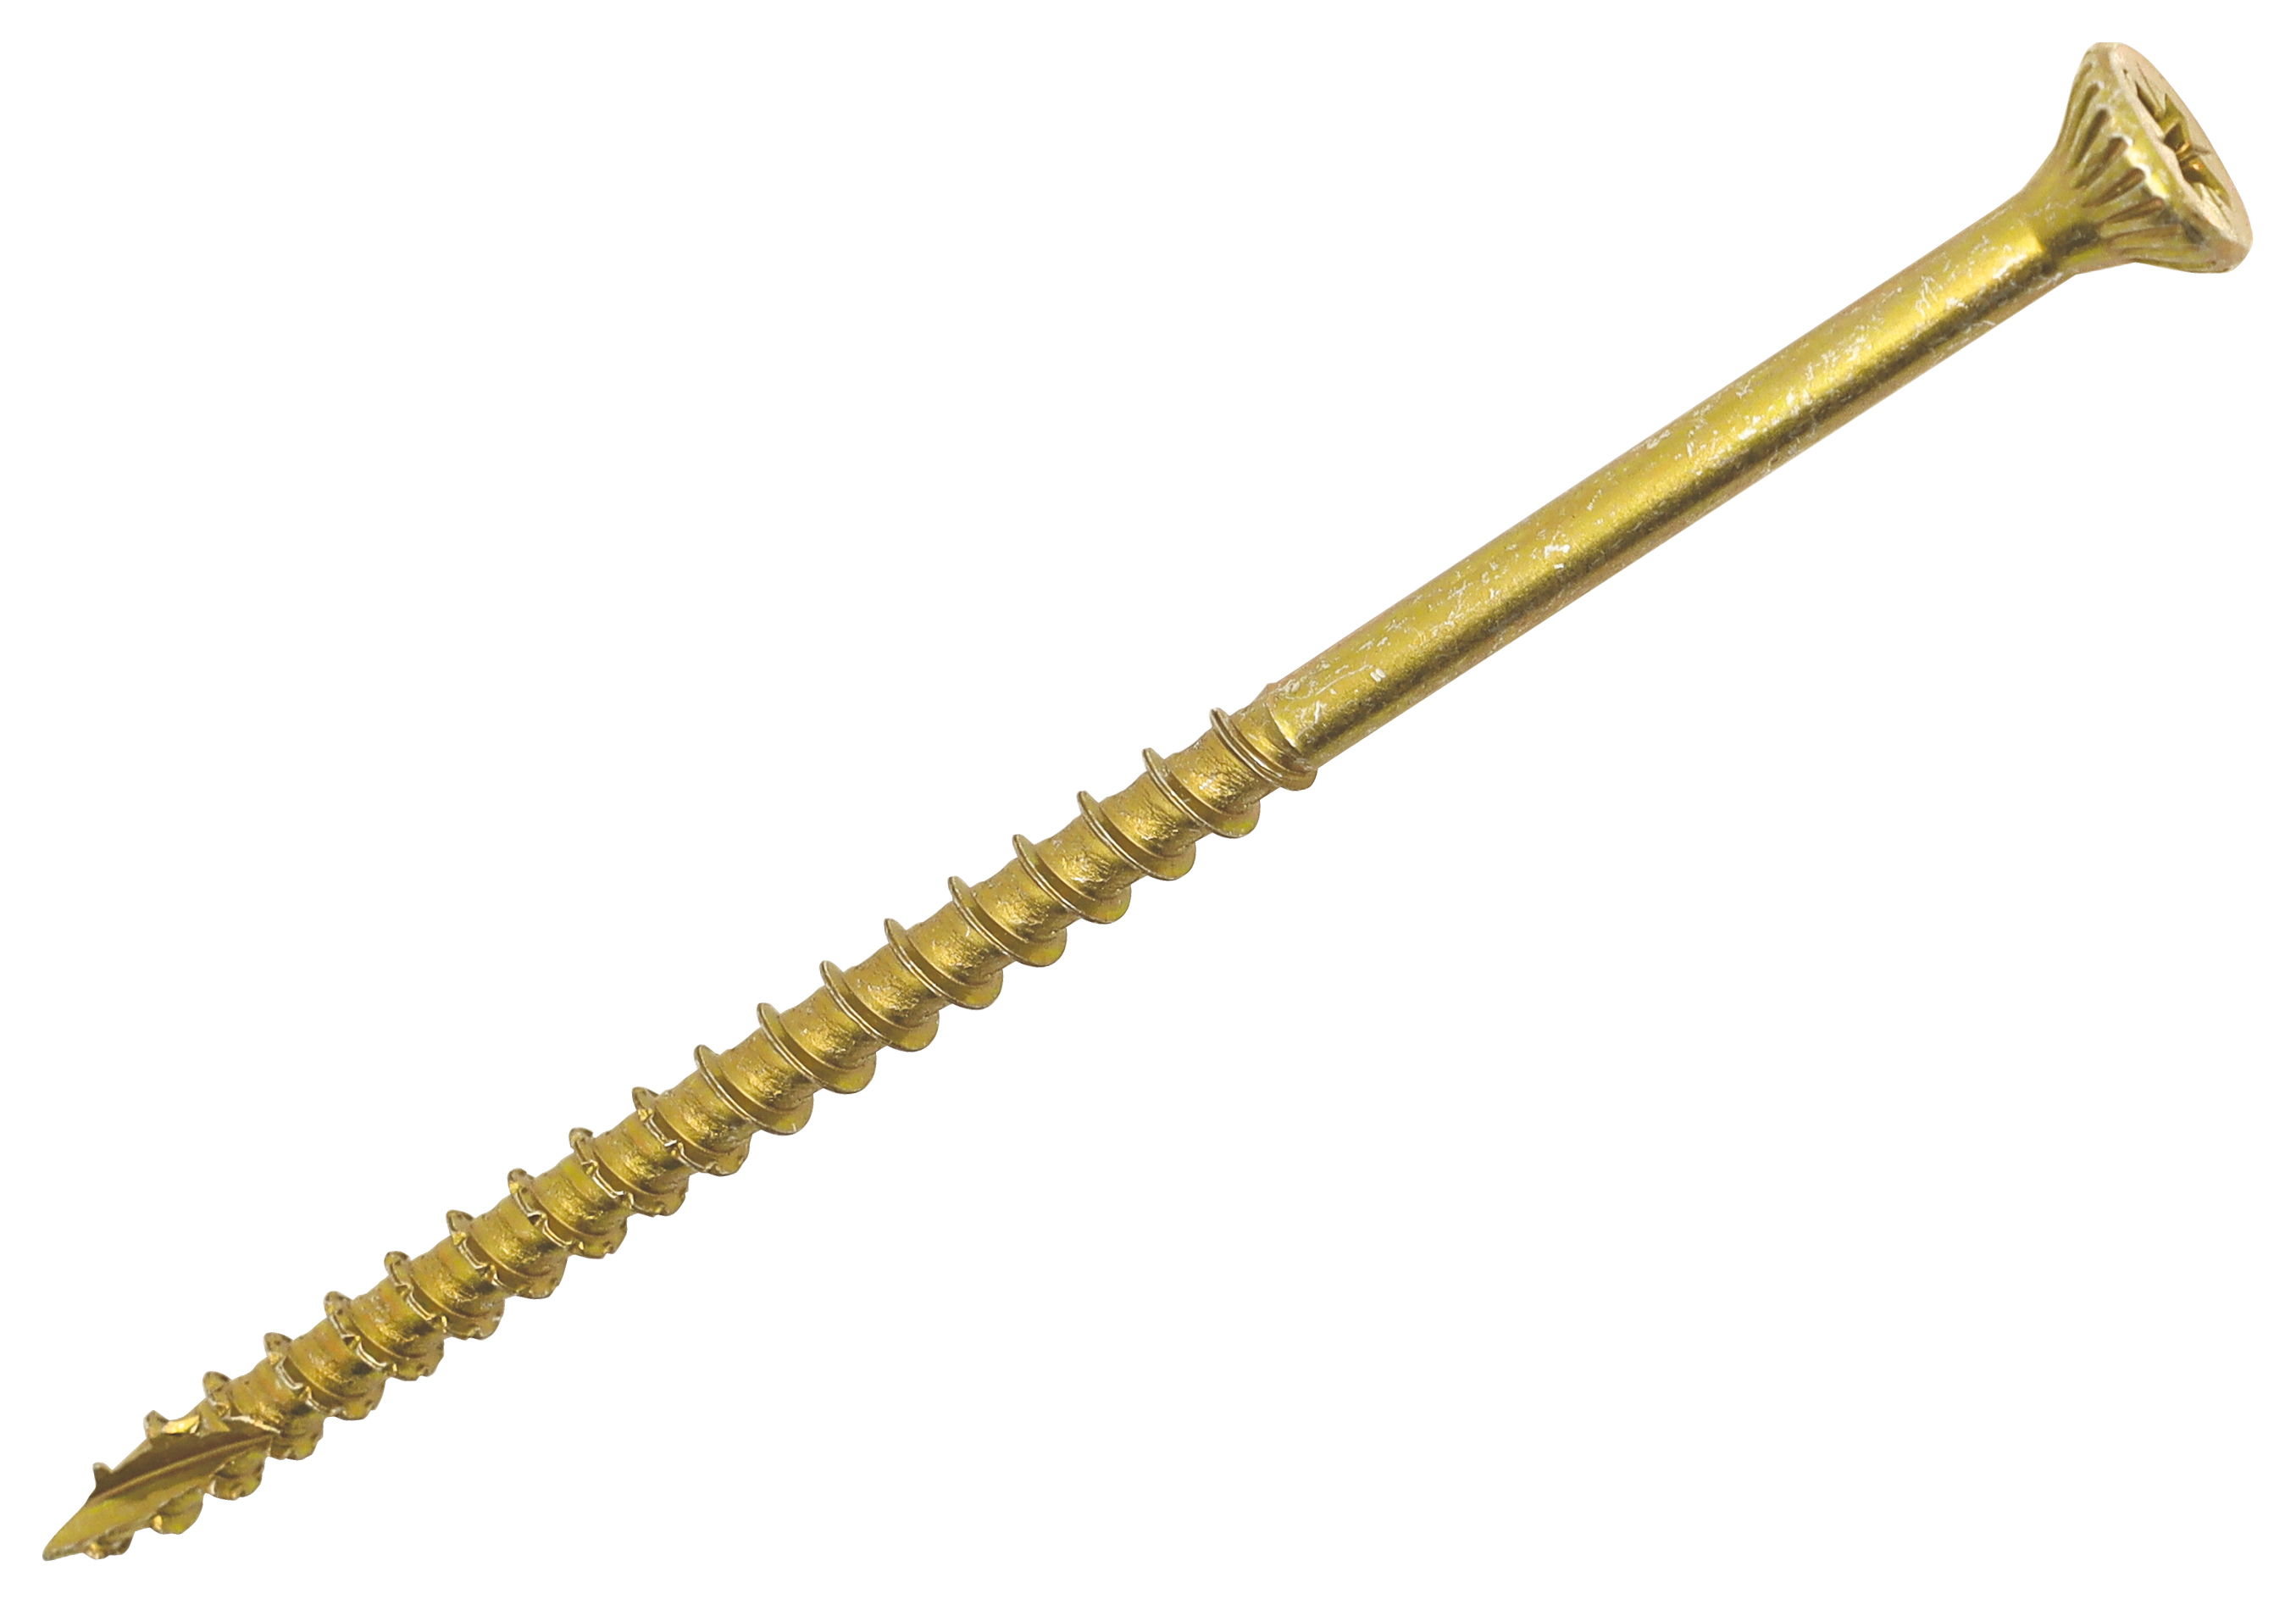 Image of Optimaxx PZ Countersunk Passivated Double Reinforced Wood Screw - 5 x 100mm - Pack of 200